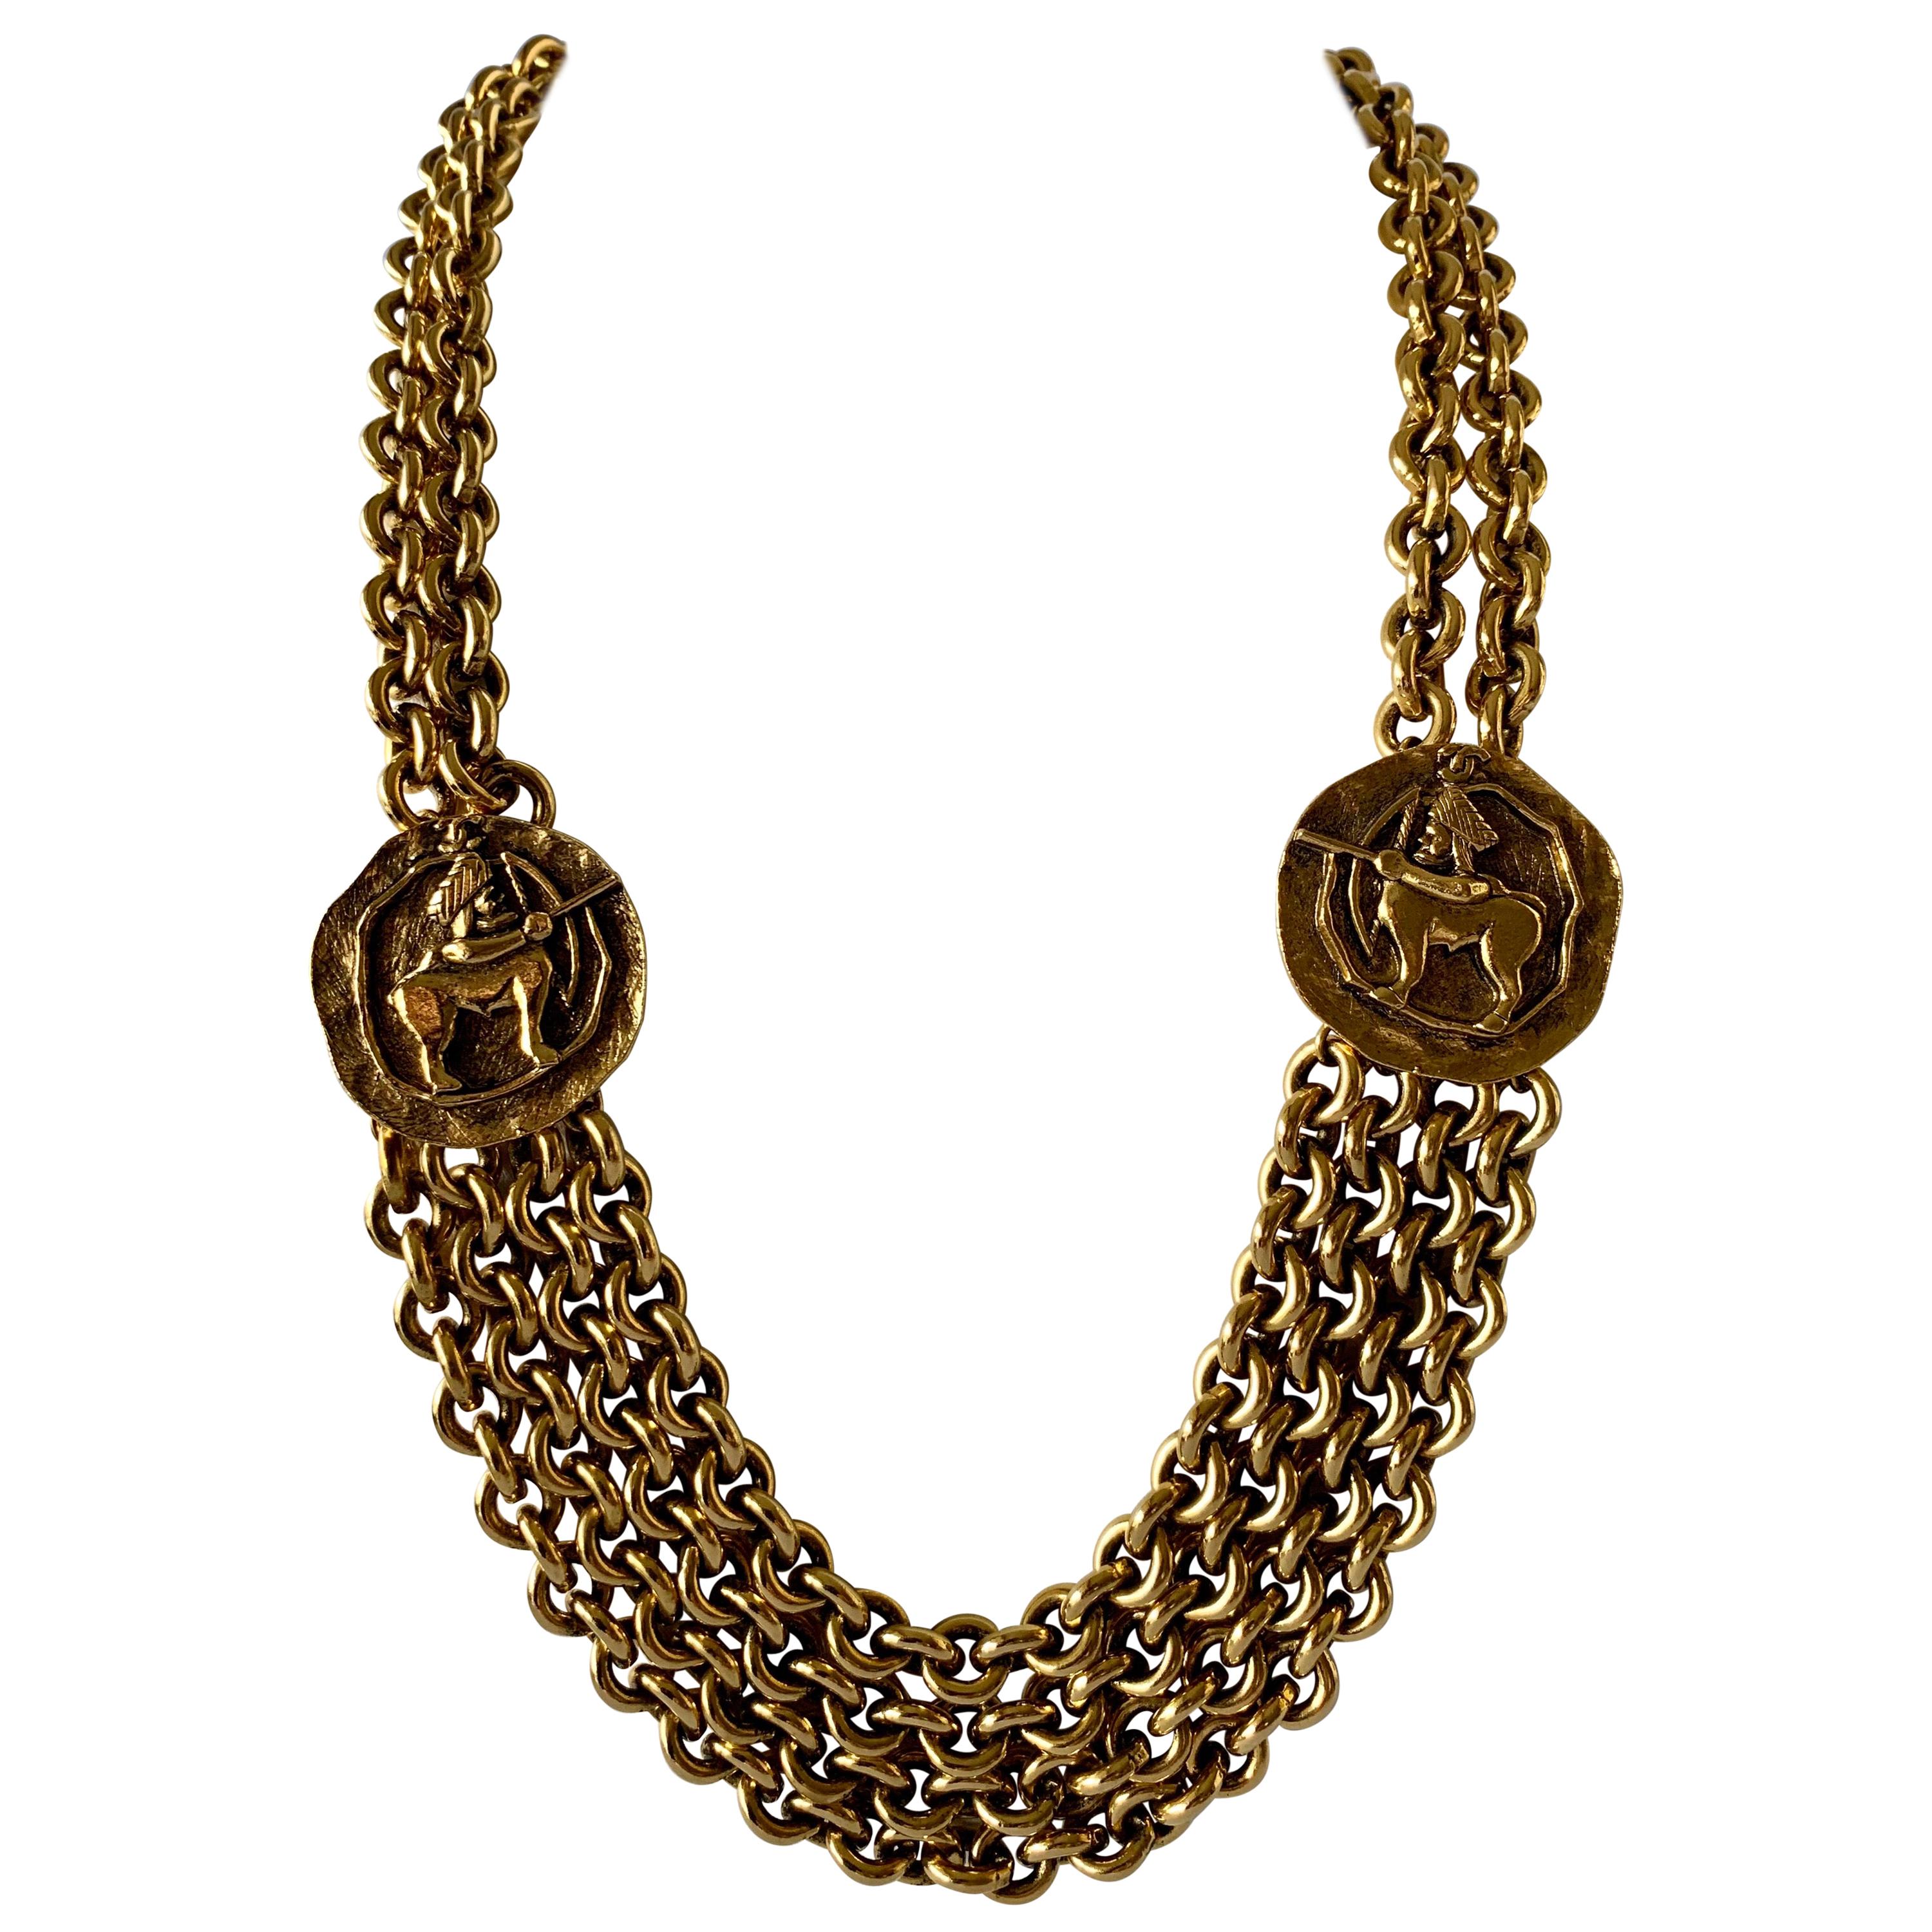 Vintage Chanel Zodiac Inspired Gilt Coin Statement Necklace 